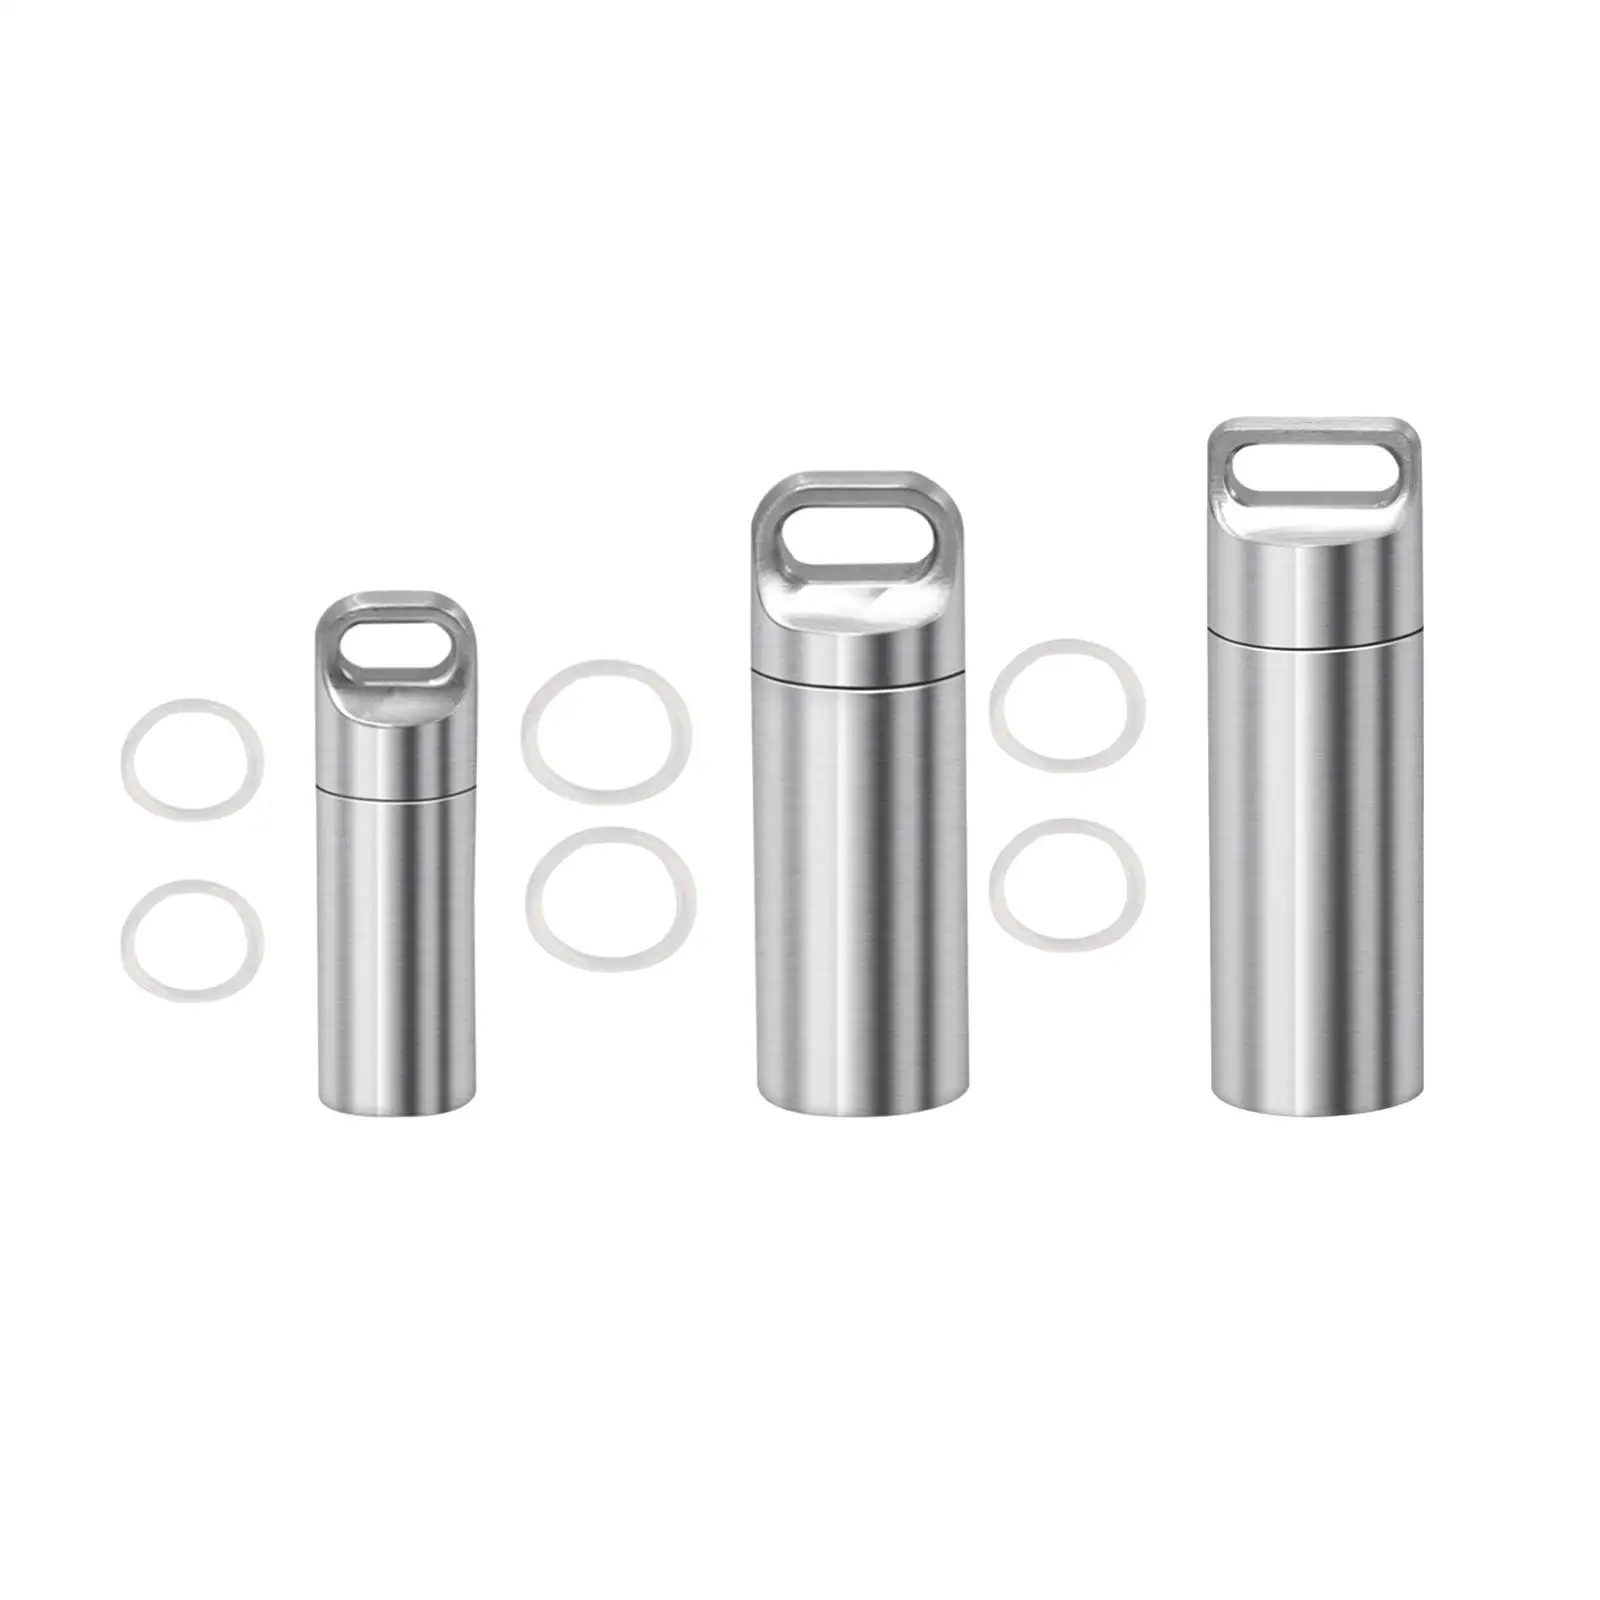 Pill Holders Stainless Steel Mini Single Chamber Small Pill Box Durable Pill Container Organizer for Travel Camping Outdoor